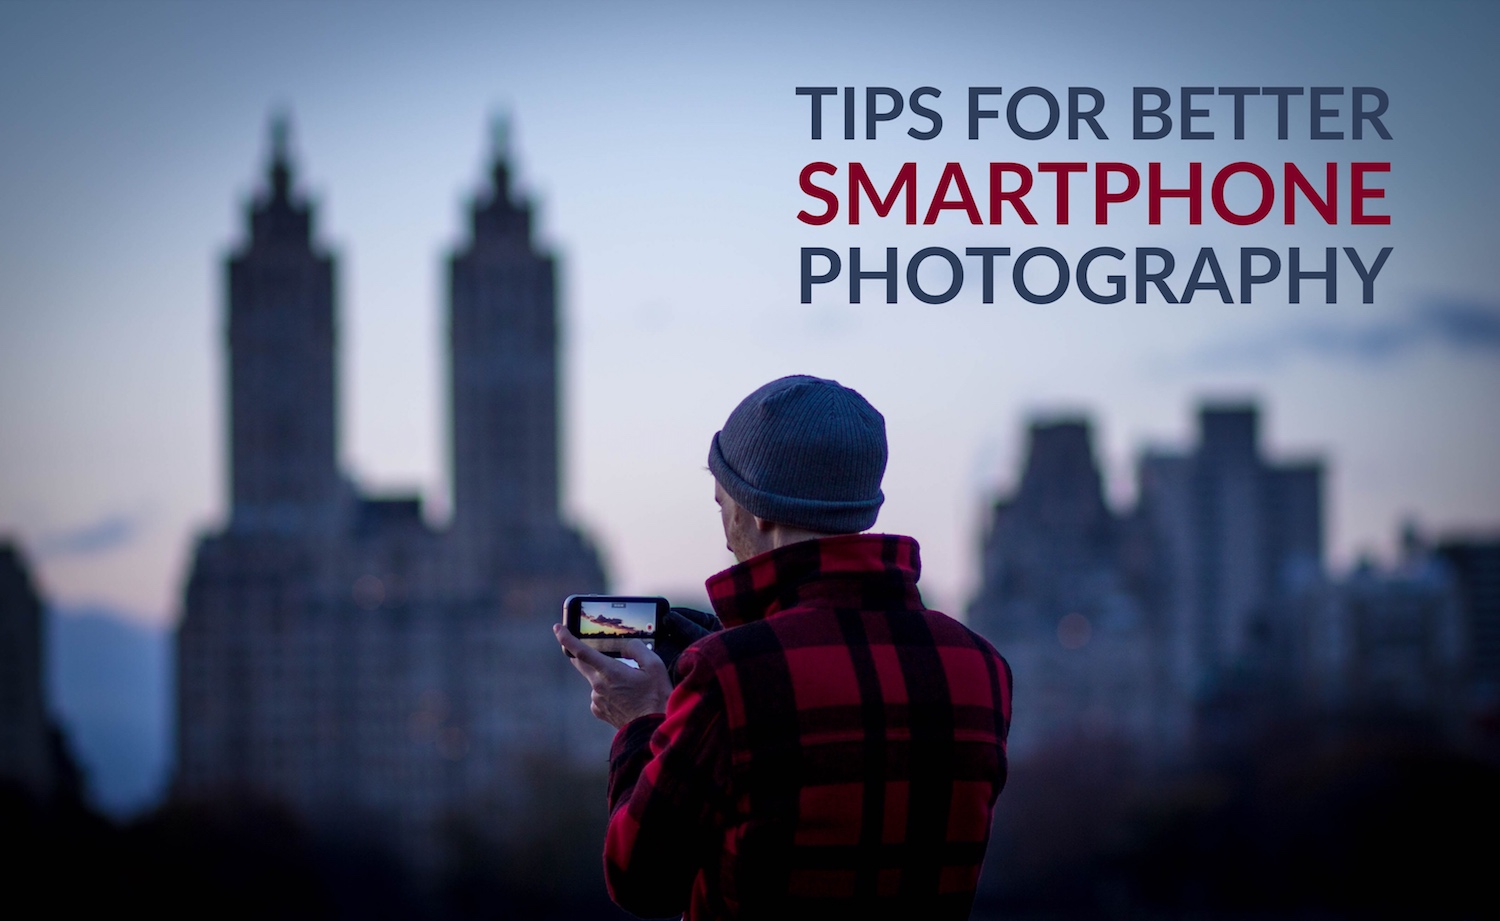 Tips for Better Smartphone Photography